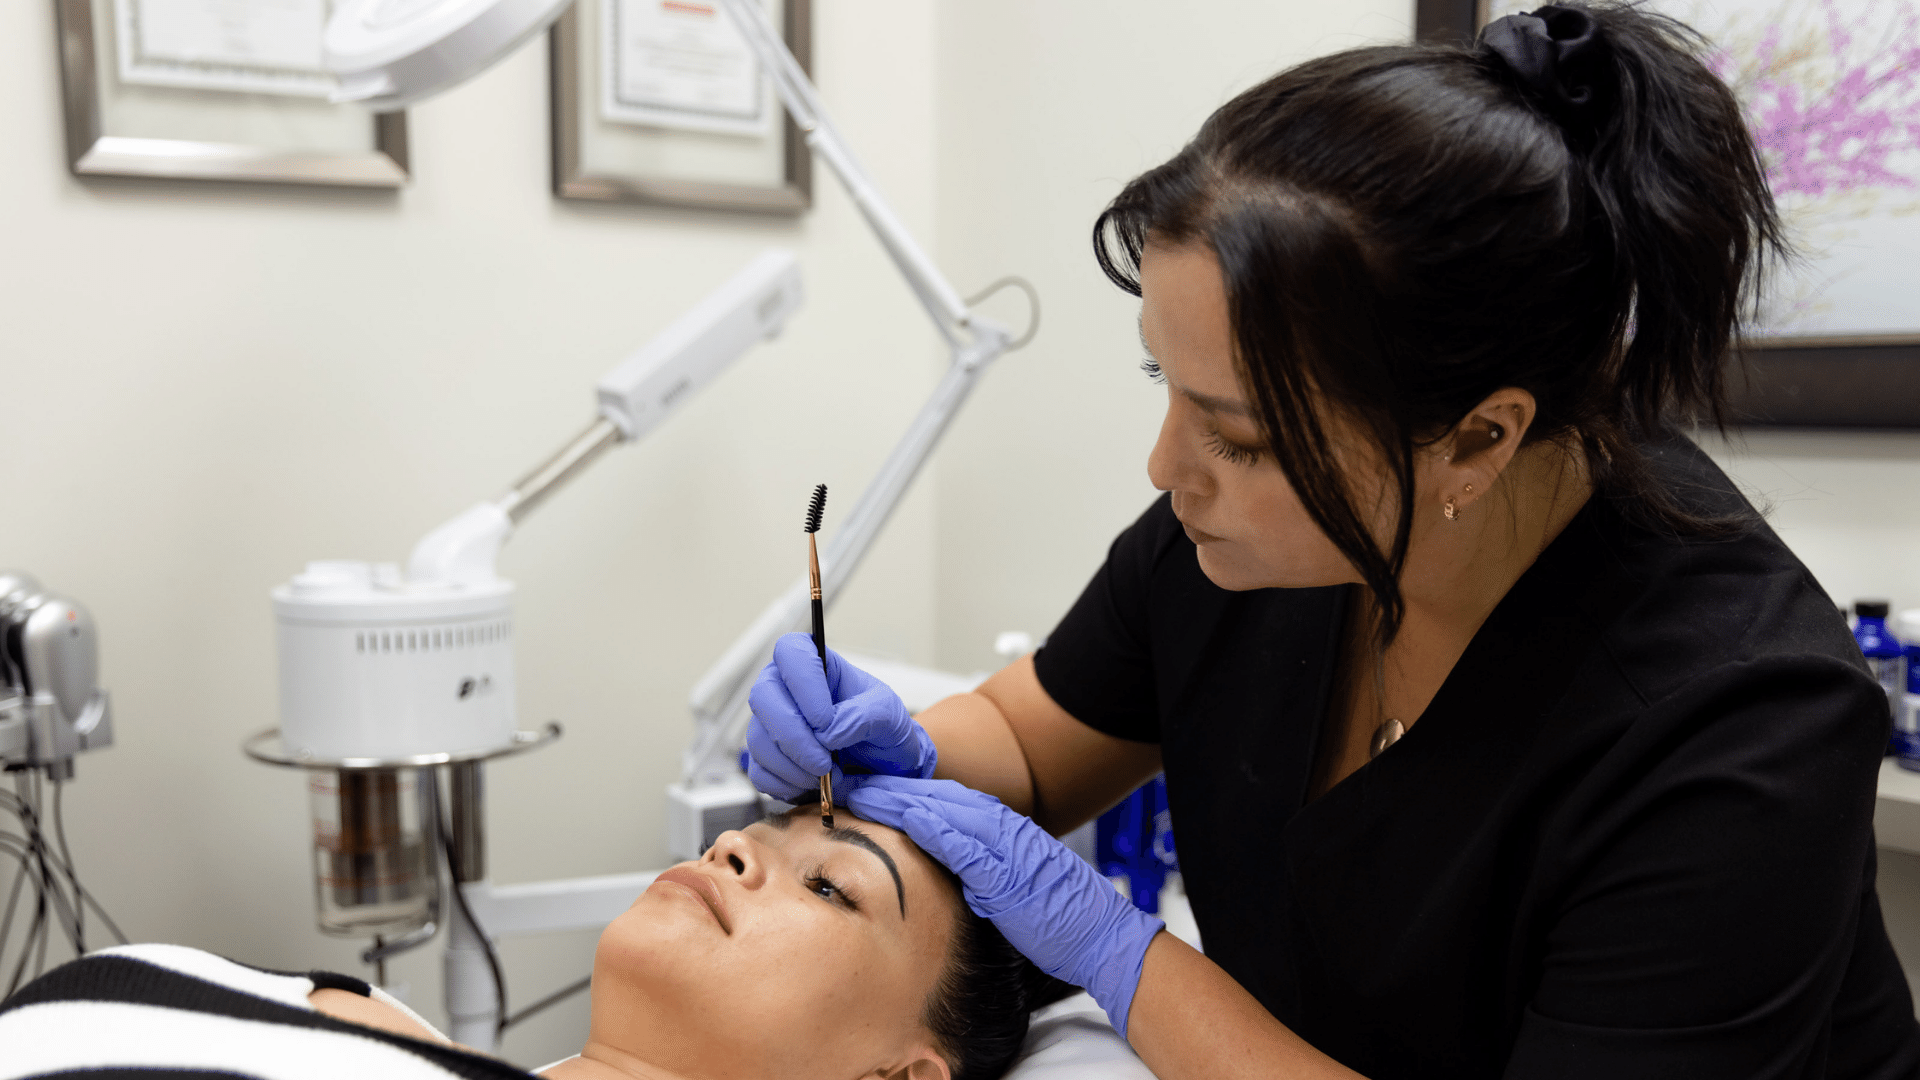 Provider performing brow tinting on a client